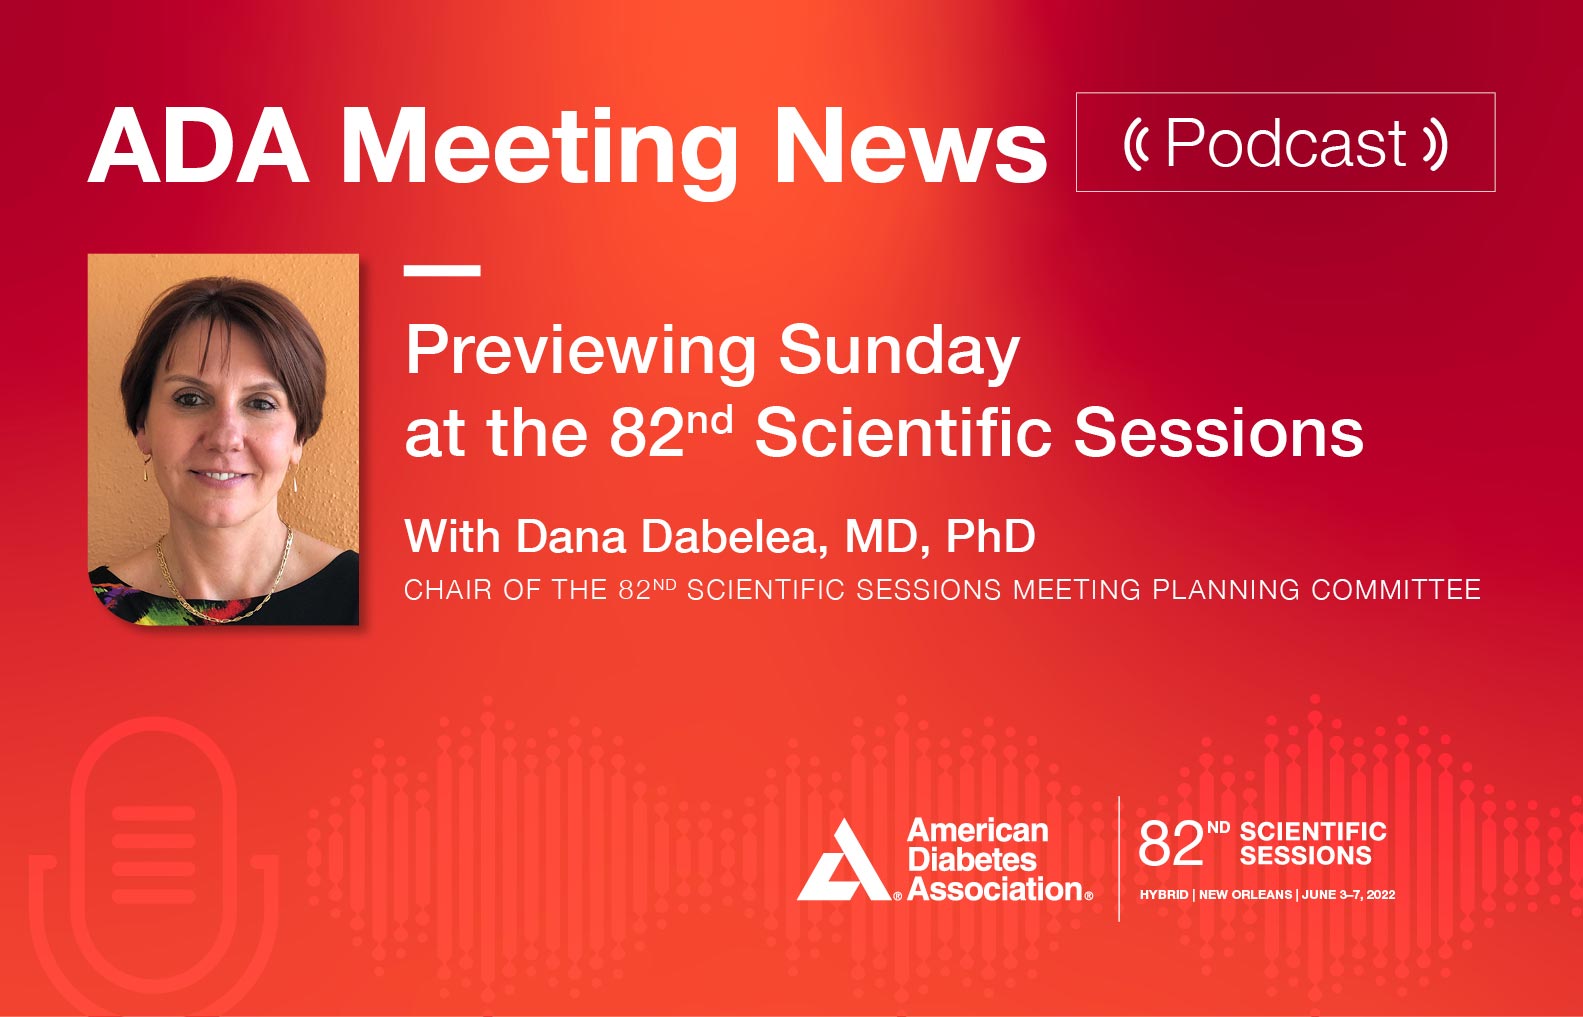 Episode 3: Looking Ahead to Sunday at the 82nd Scientific Sessions